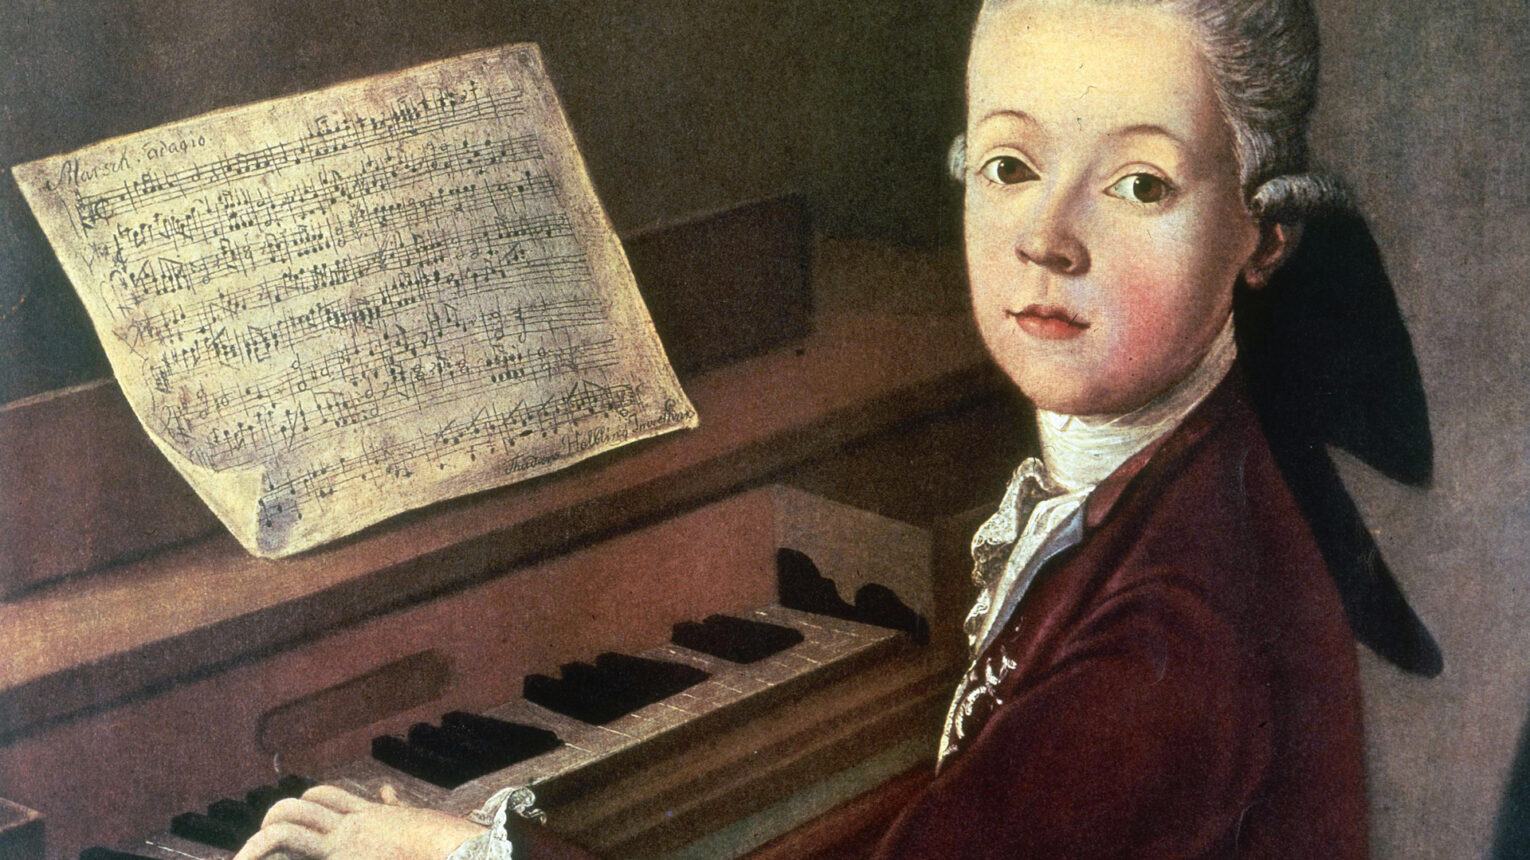 what instruments did mozart play